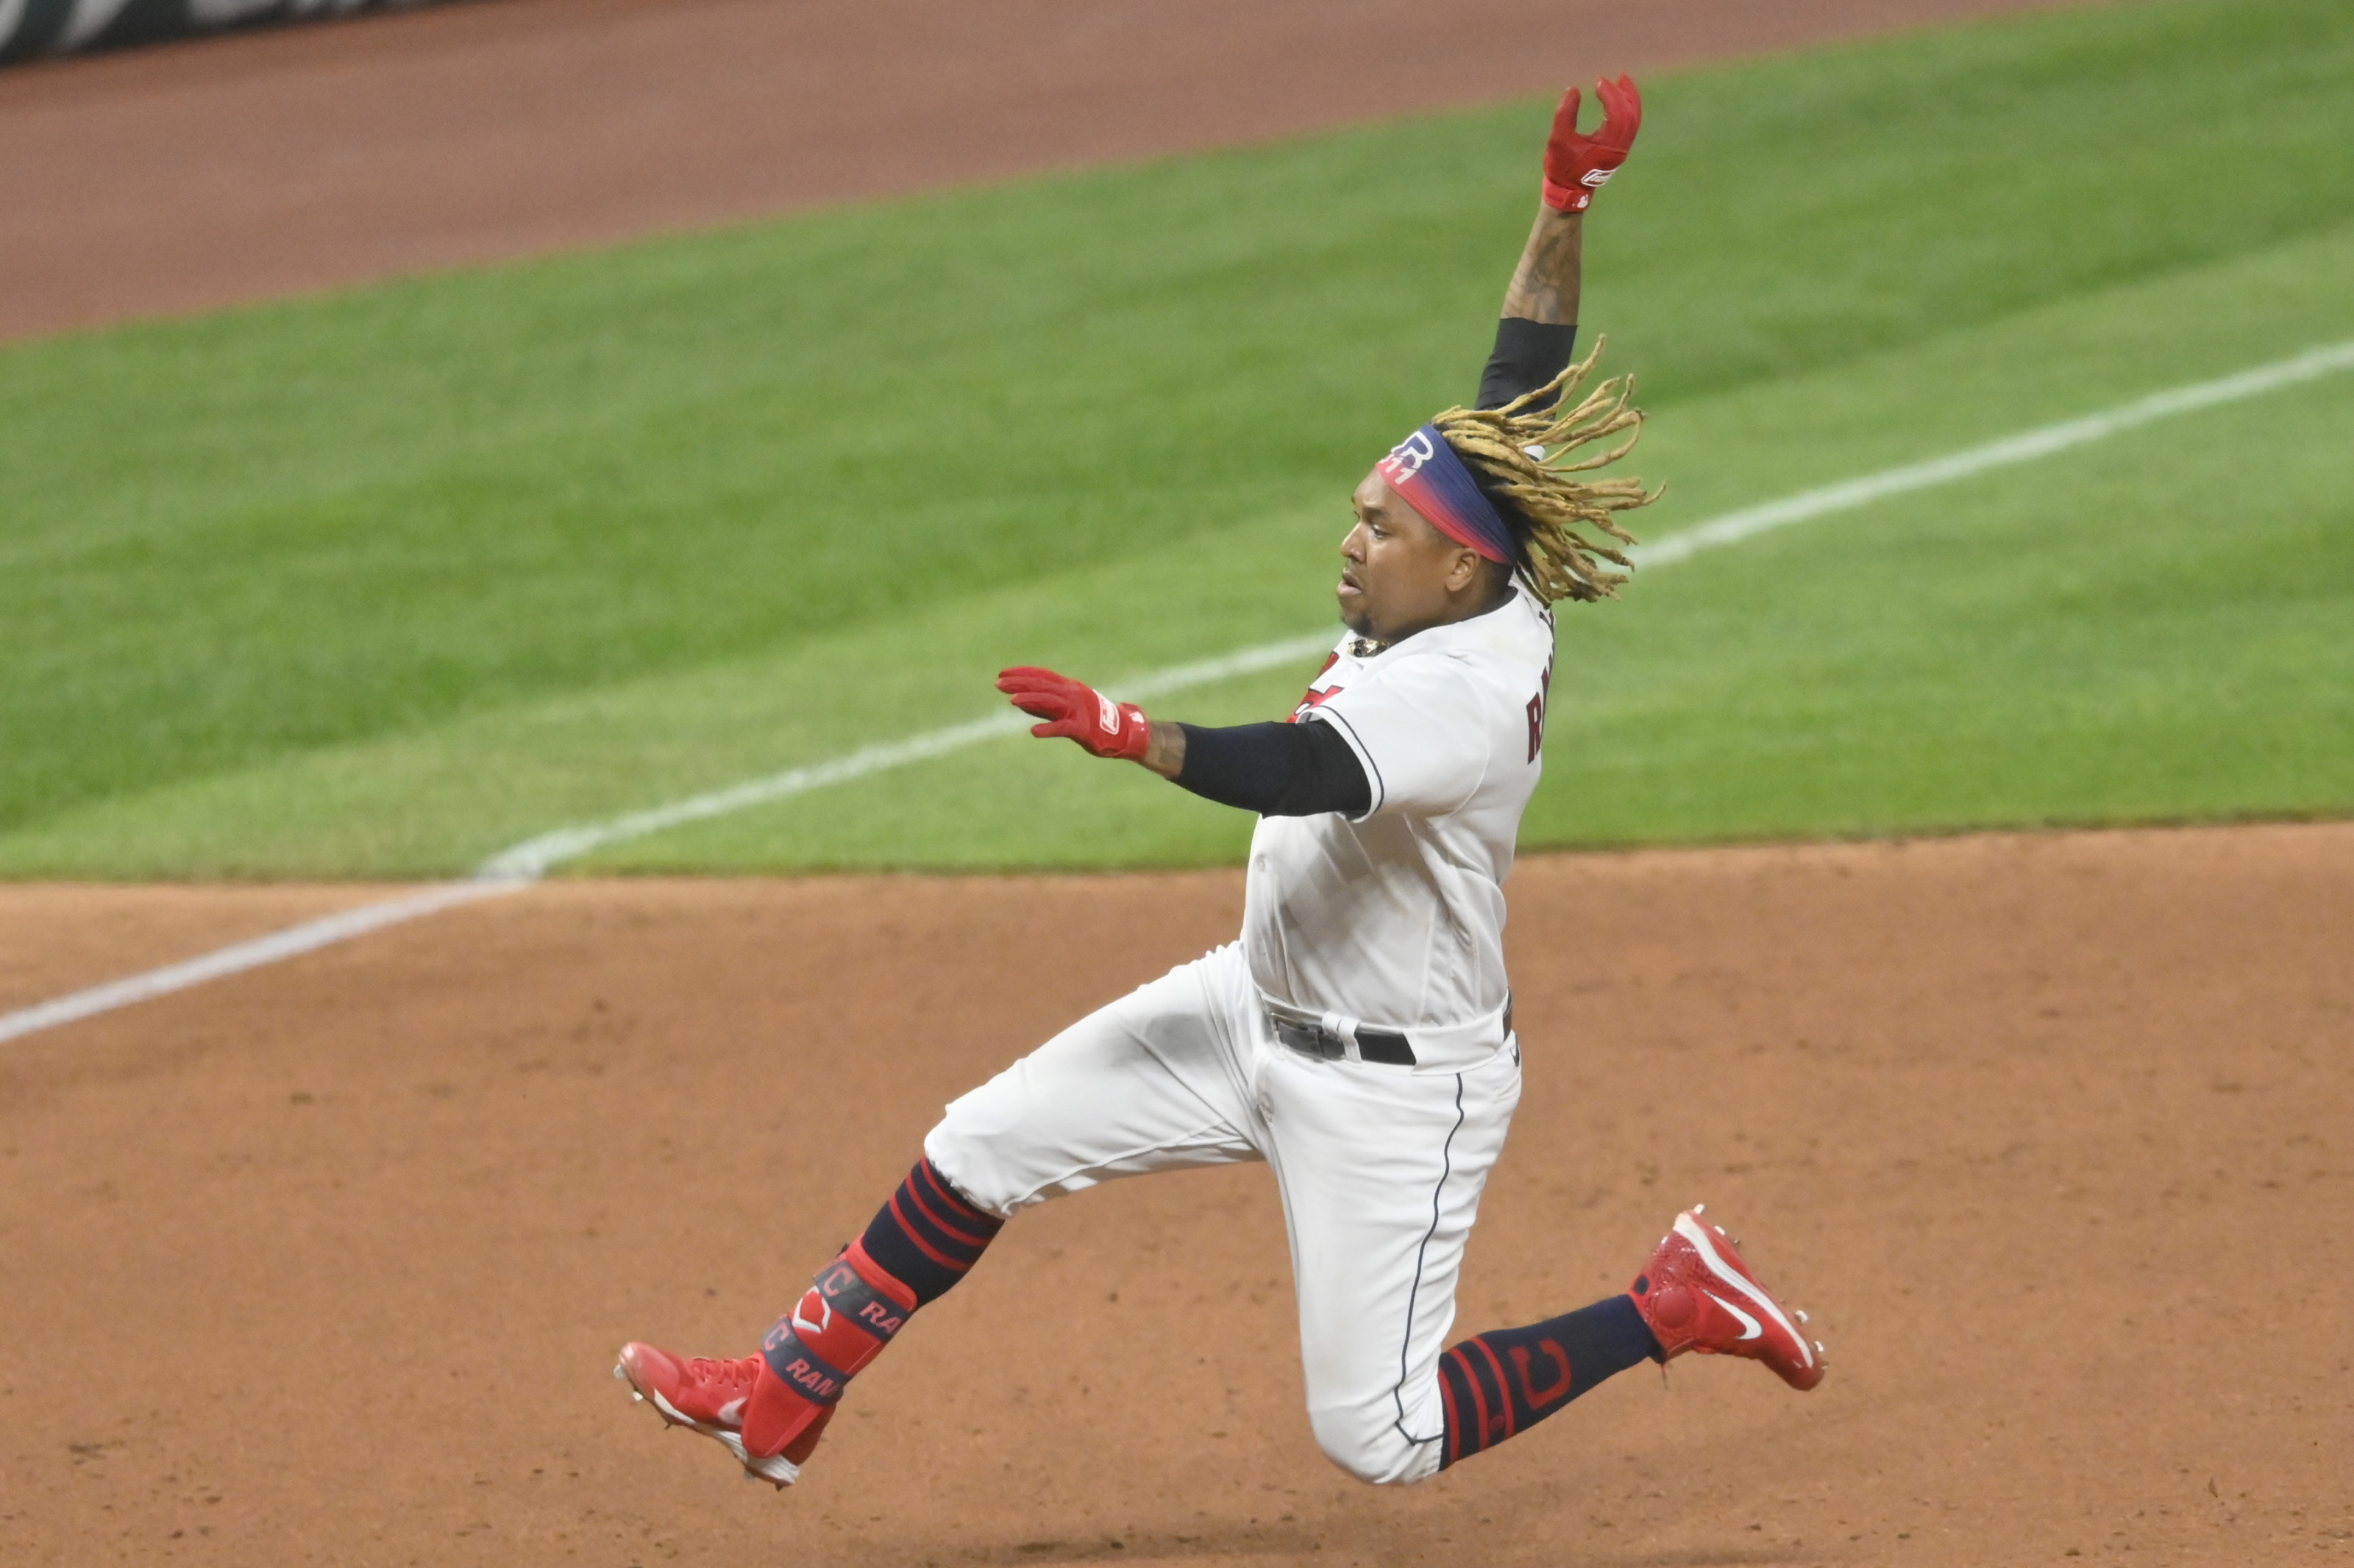 Cleveland Indians reportedly ready to deal Jose Ramirez